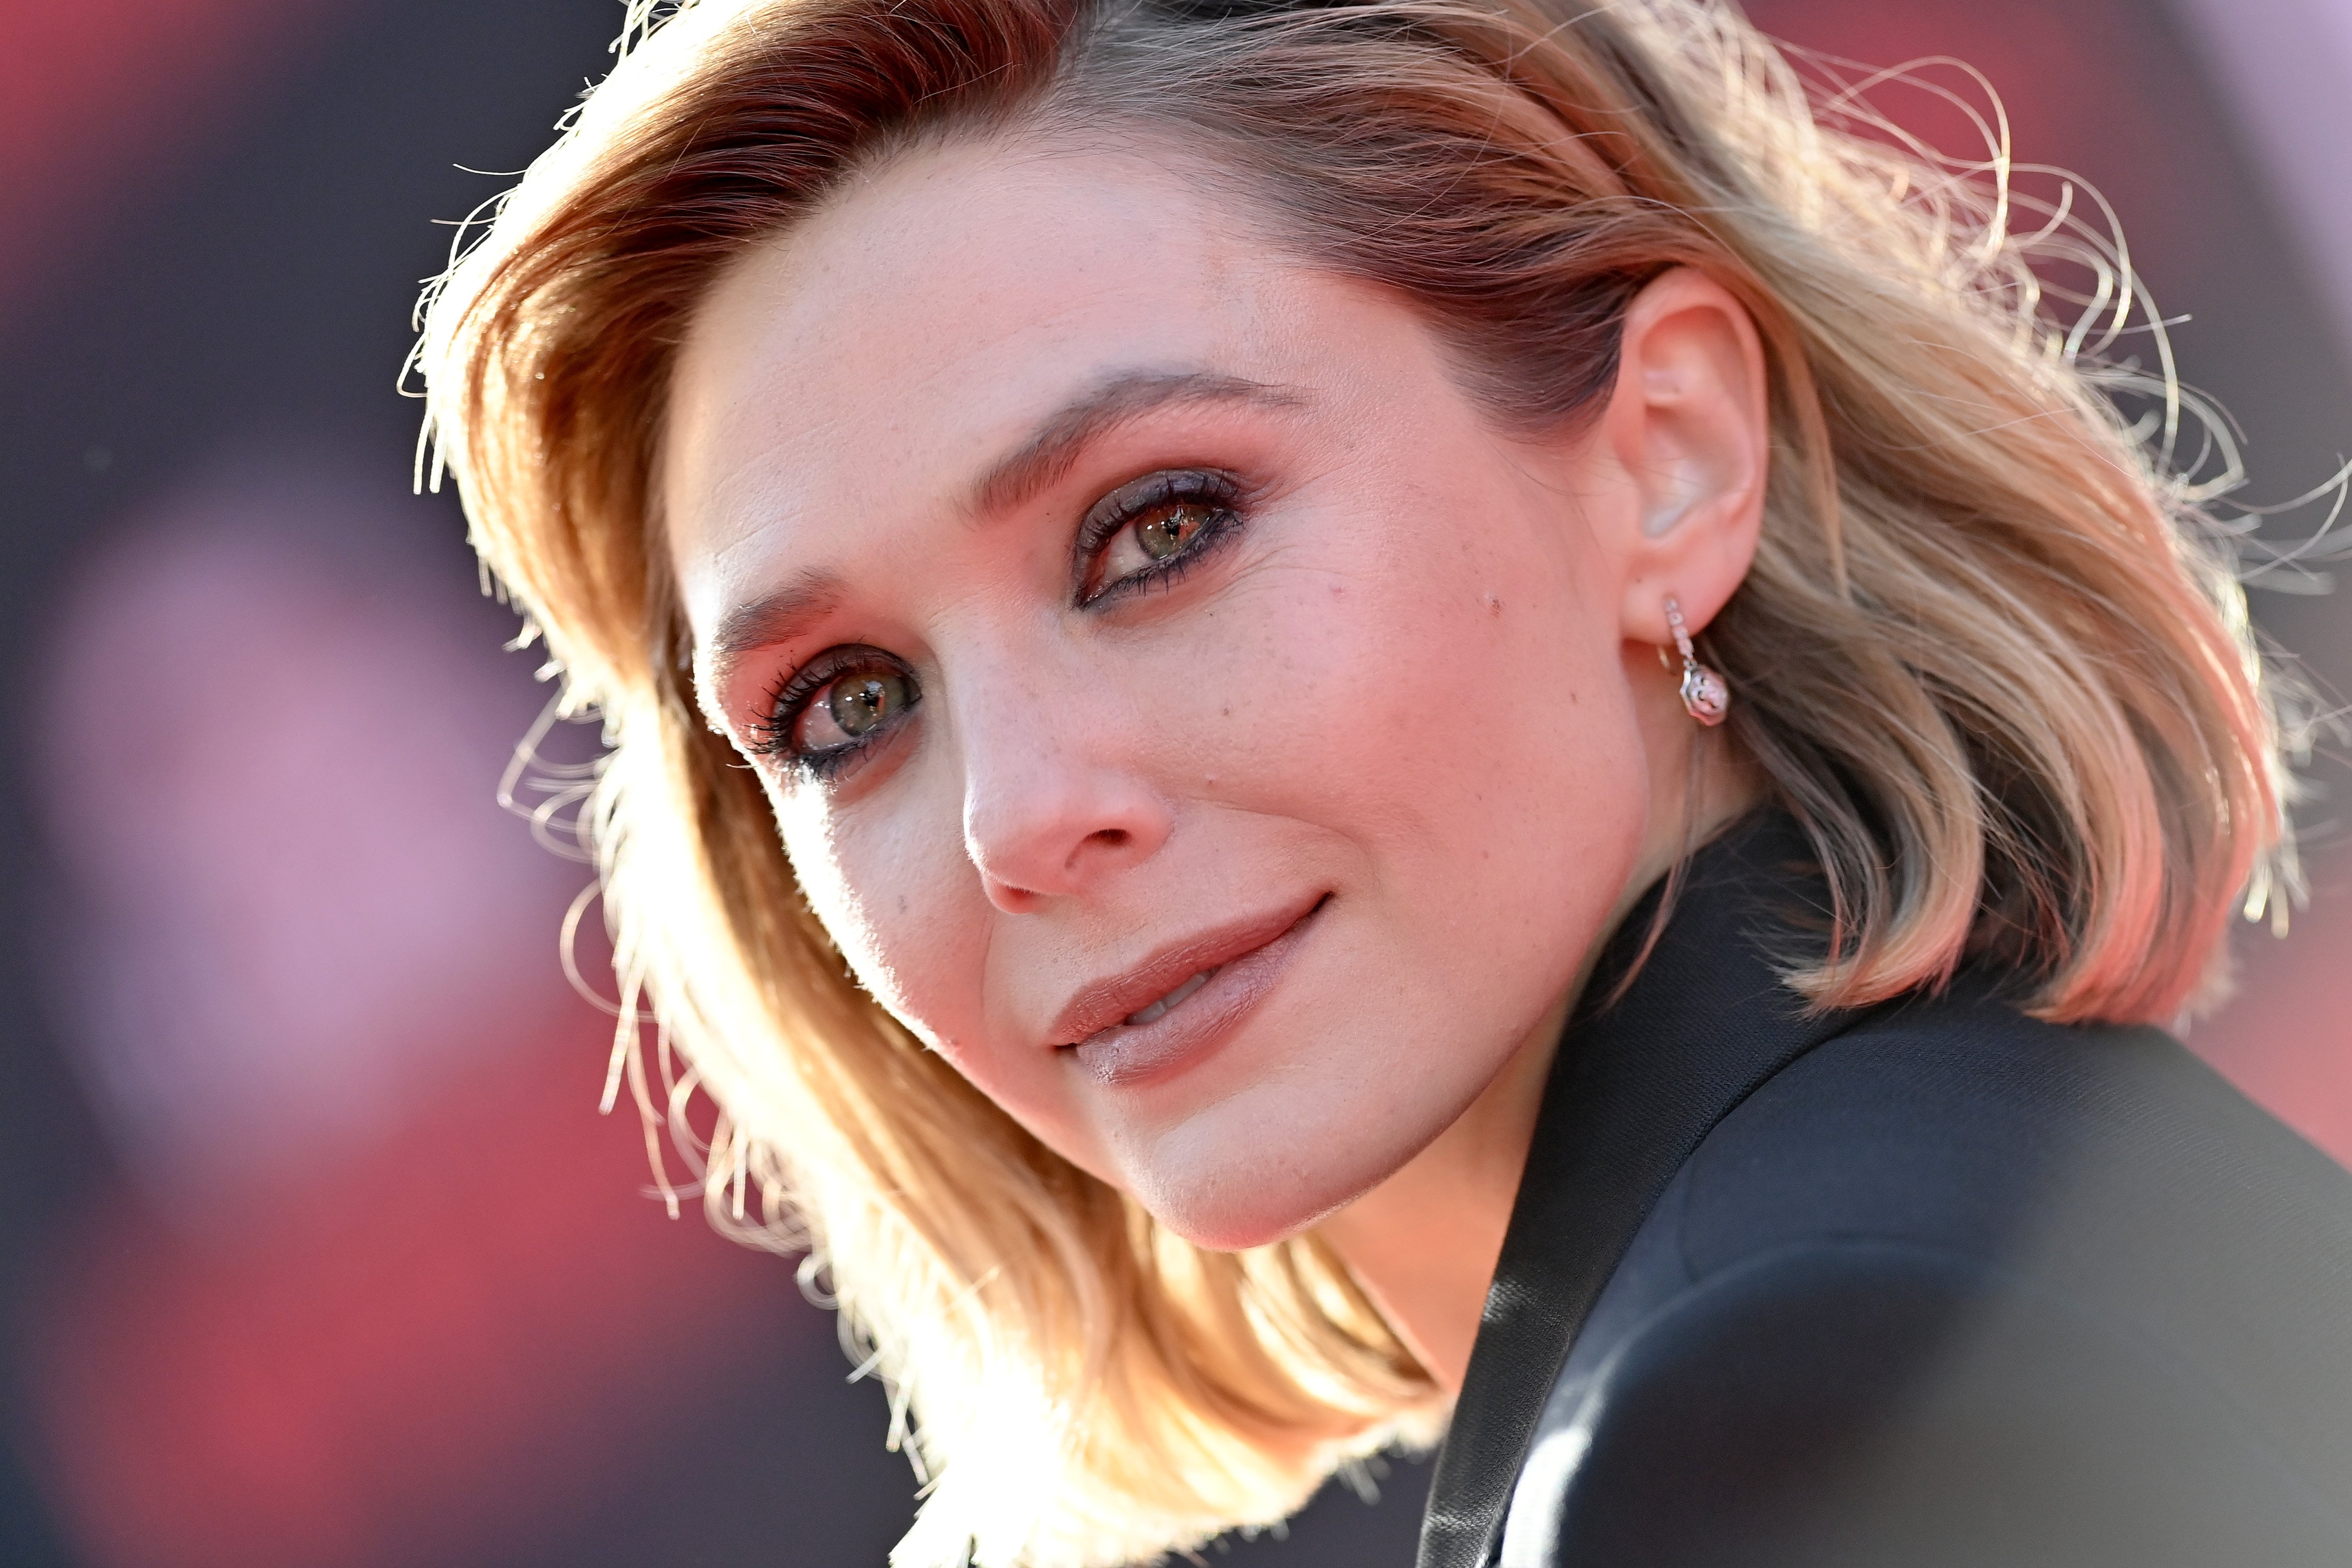 Elizabeth Olsen, who stars as the Scarlet Witch in the Marvel Cinematic Universe, wears a black suit jacket.